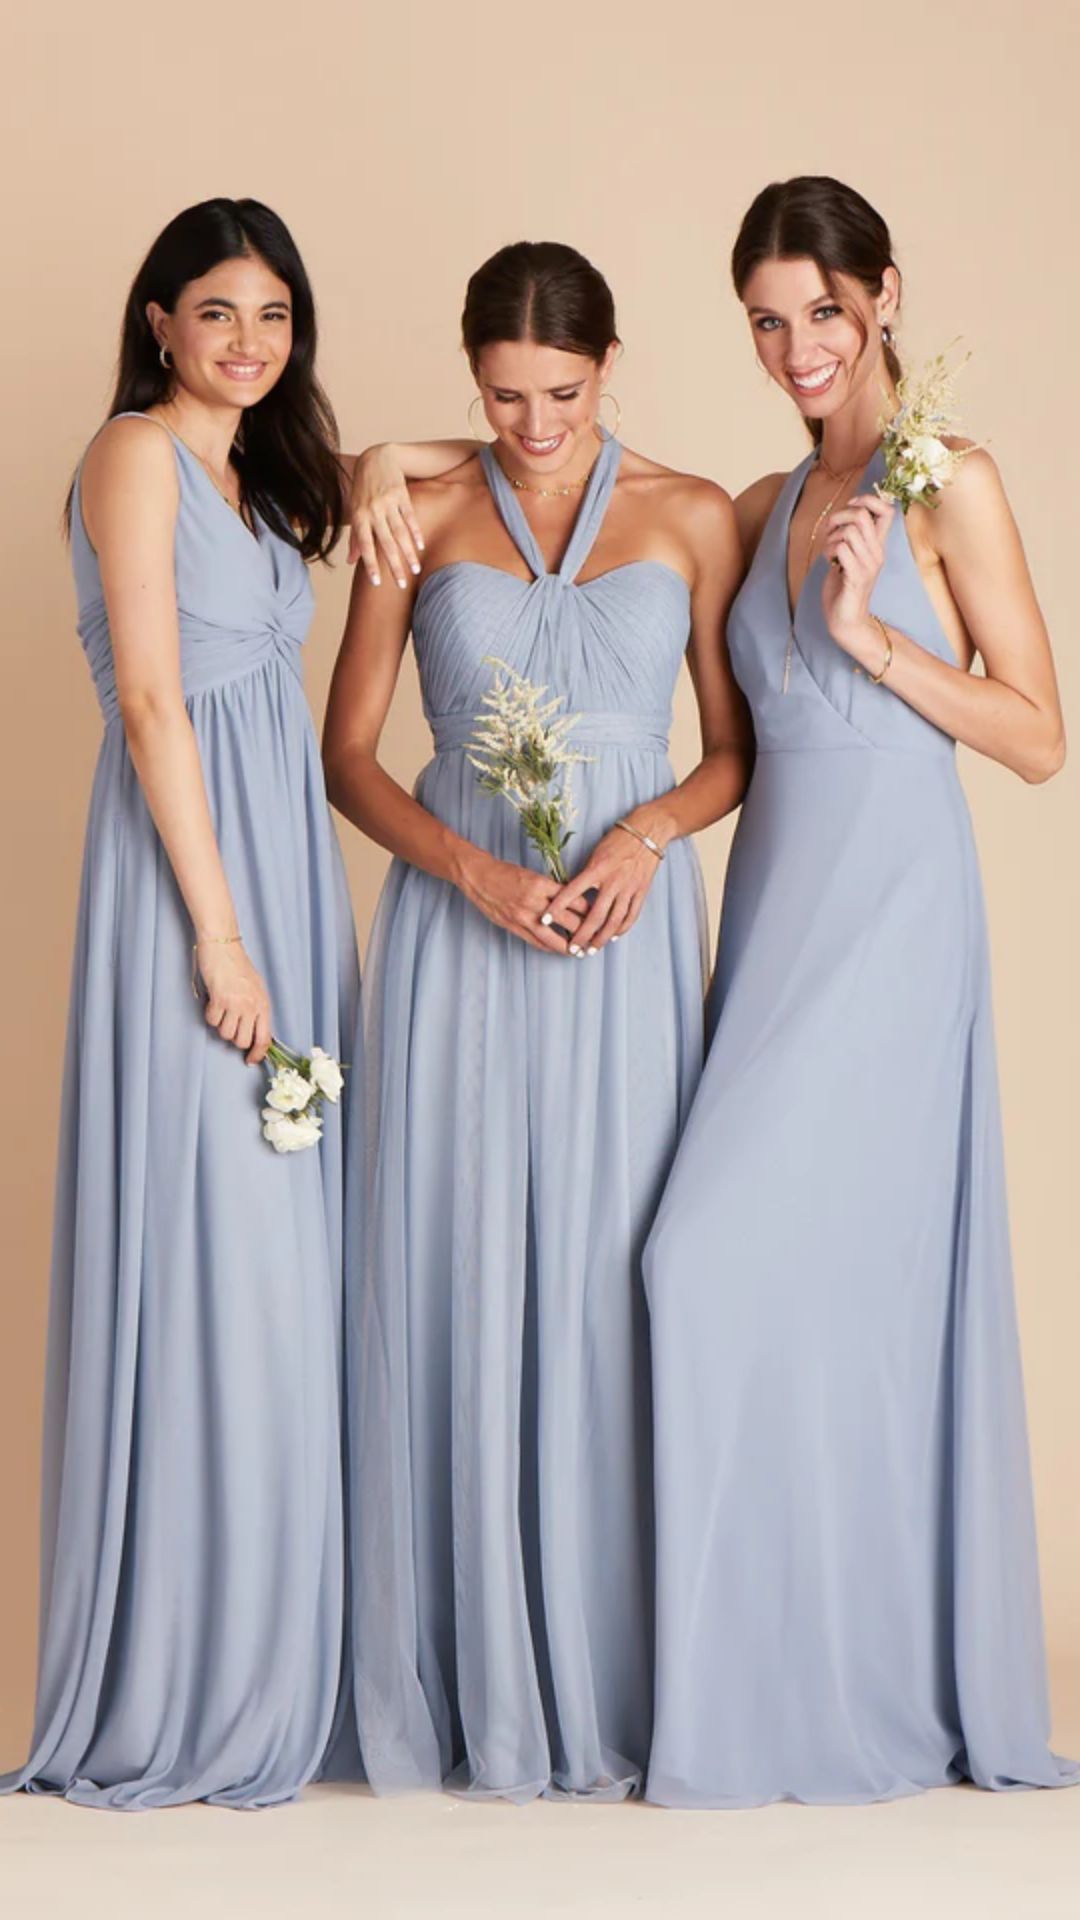 28 Affordable Dusty Blue Bridesmaid Dresses For 2023